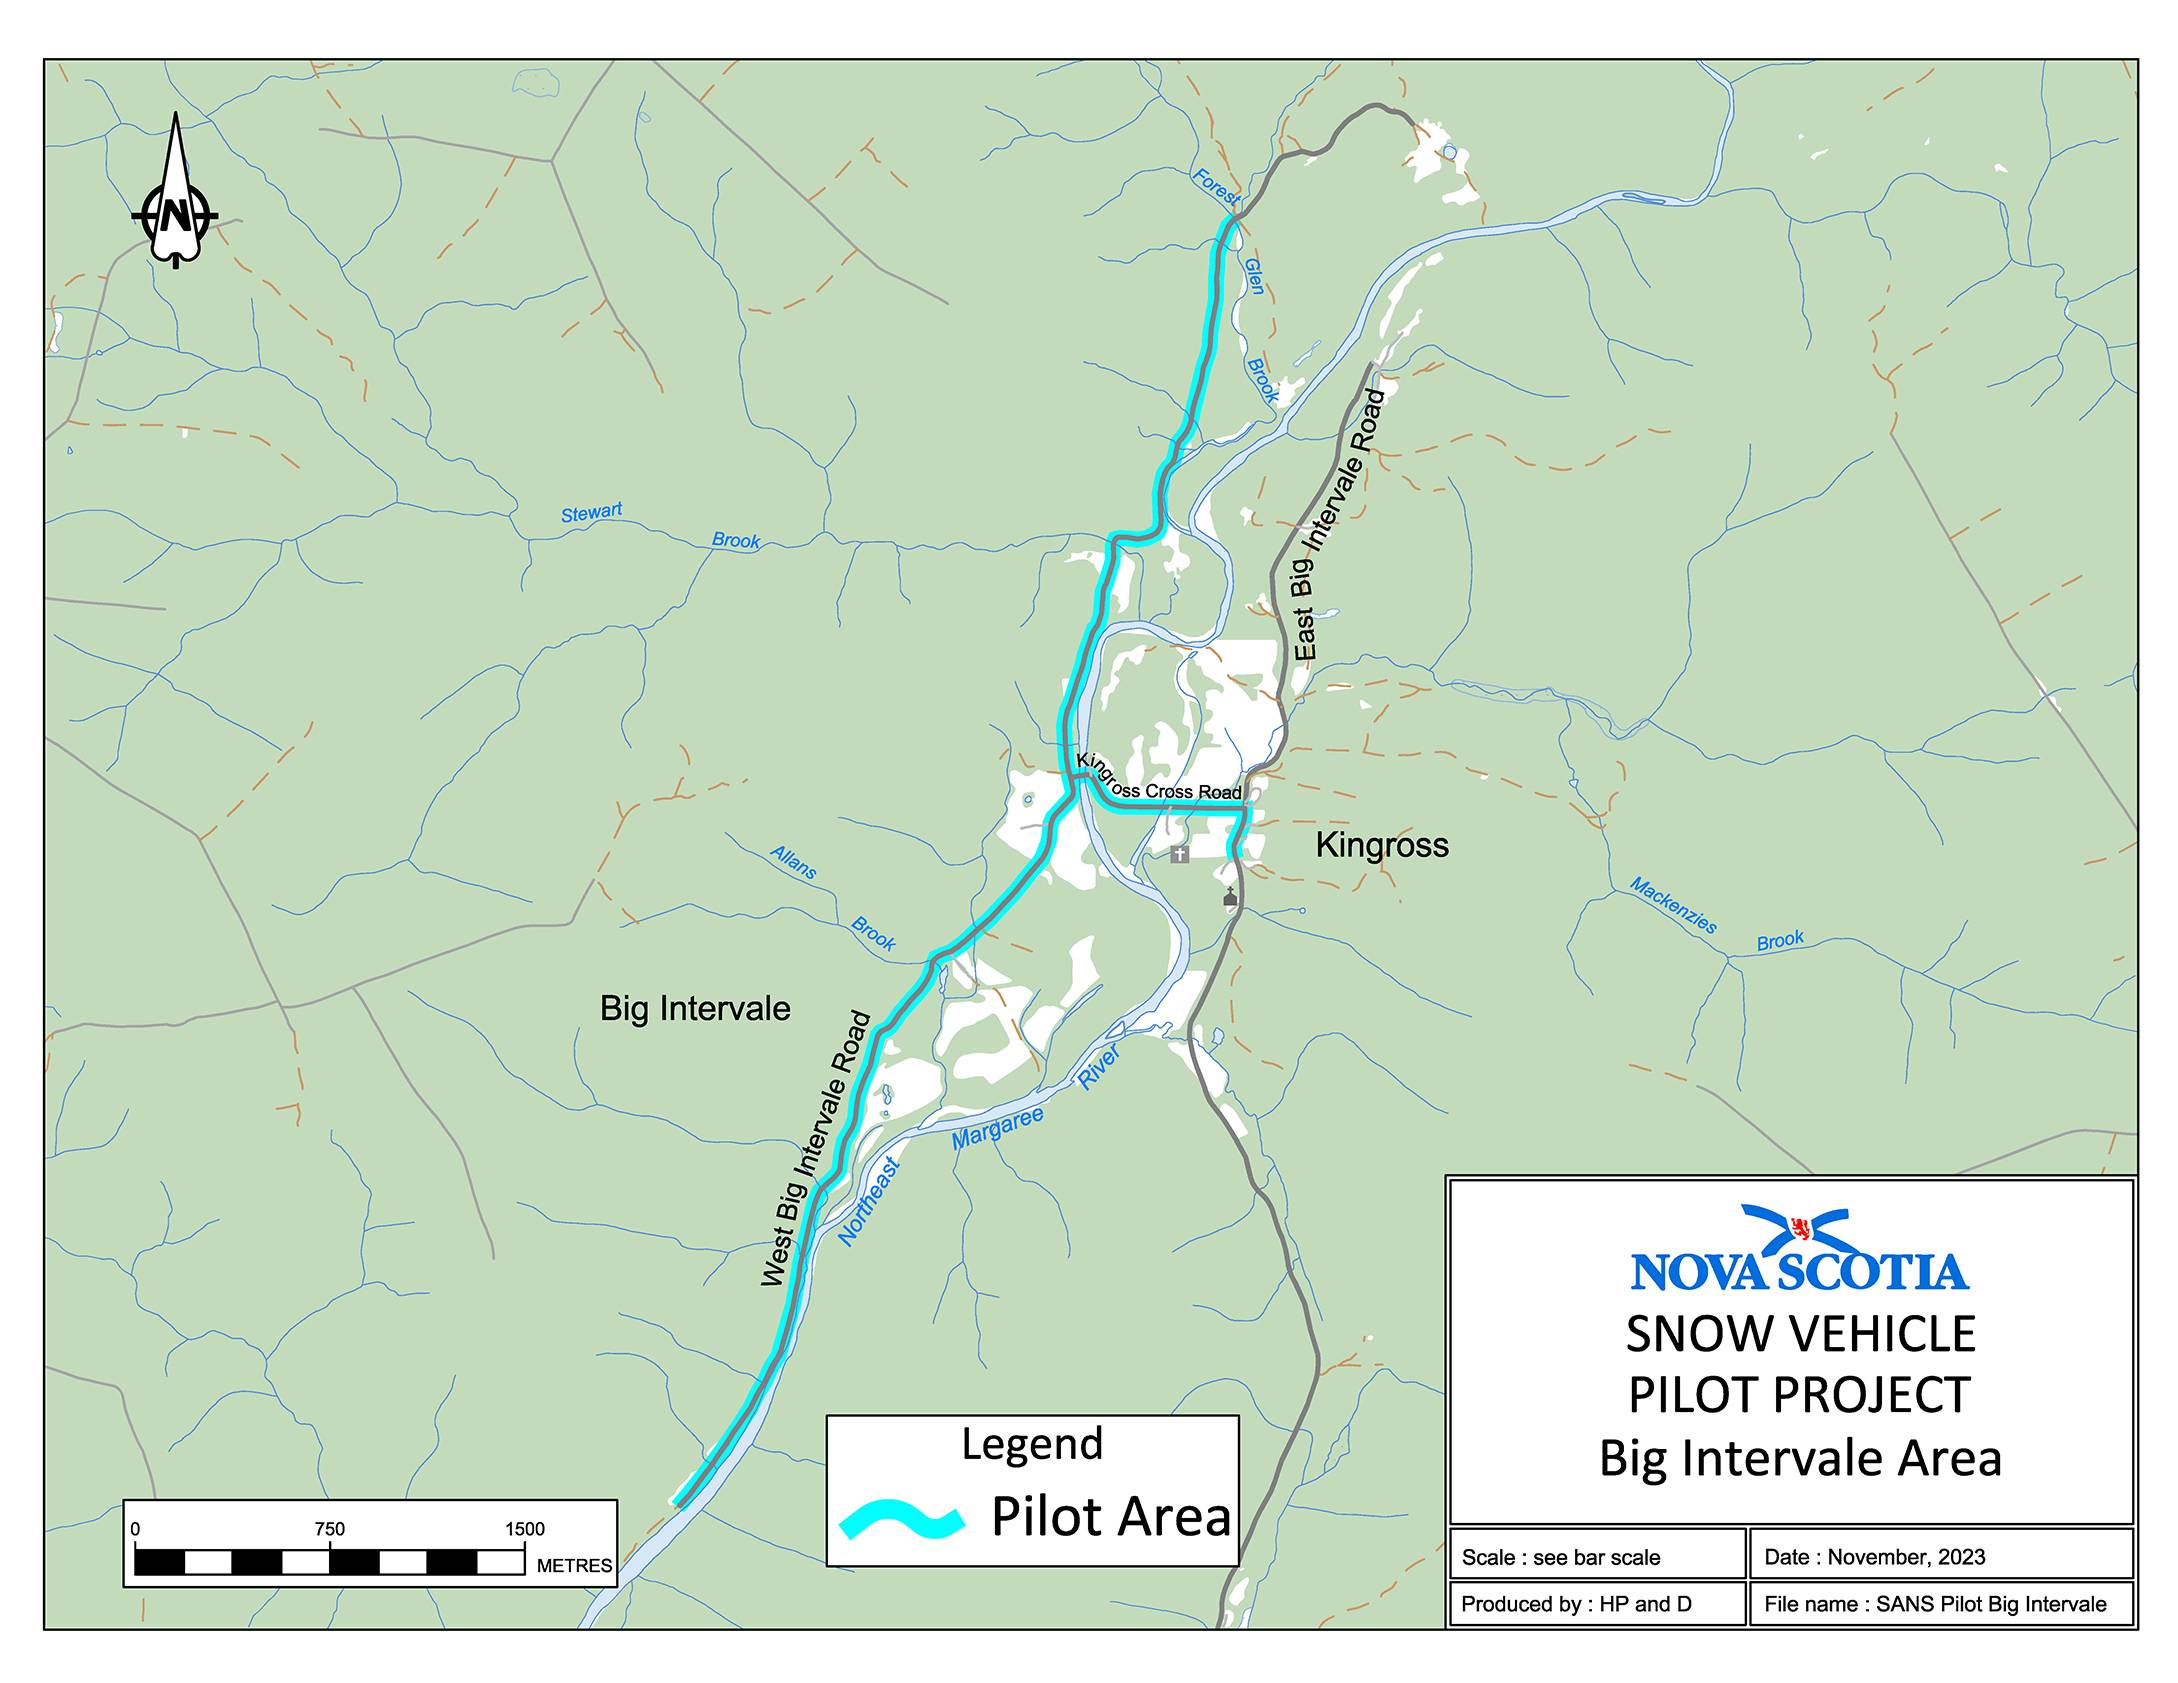 Graphic showing map of the Snow Vehicle Pilot Project Big Intervale Area